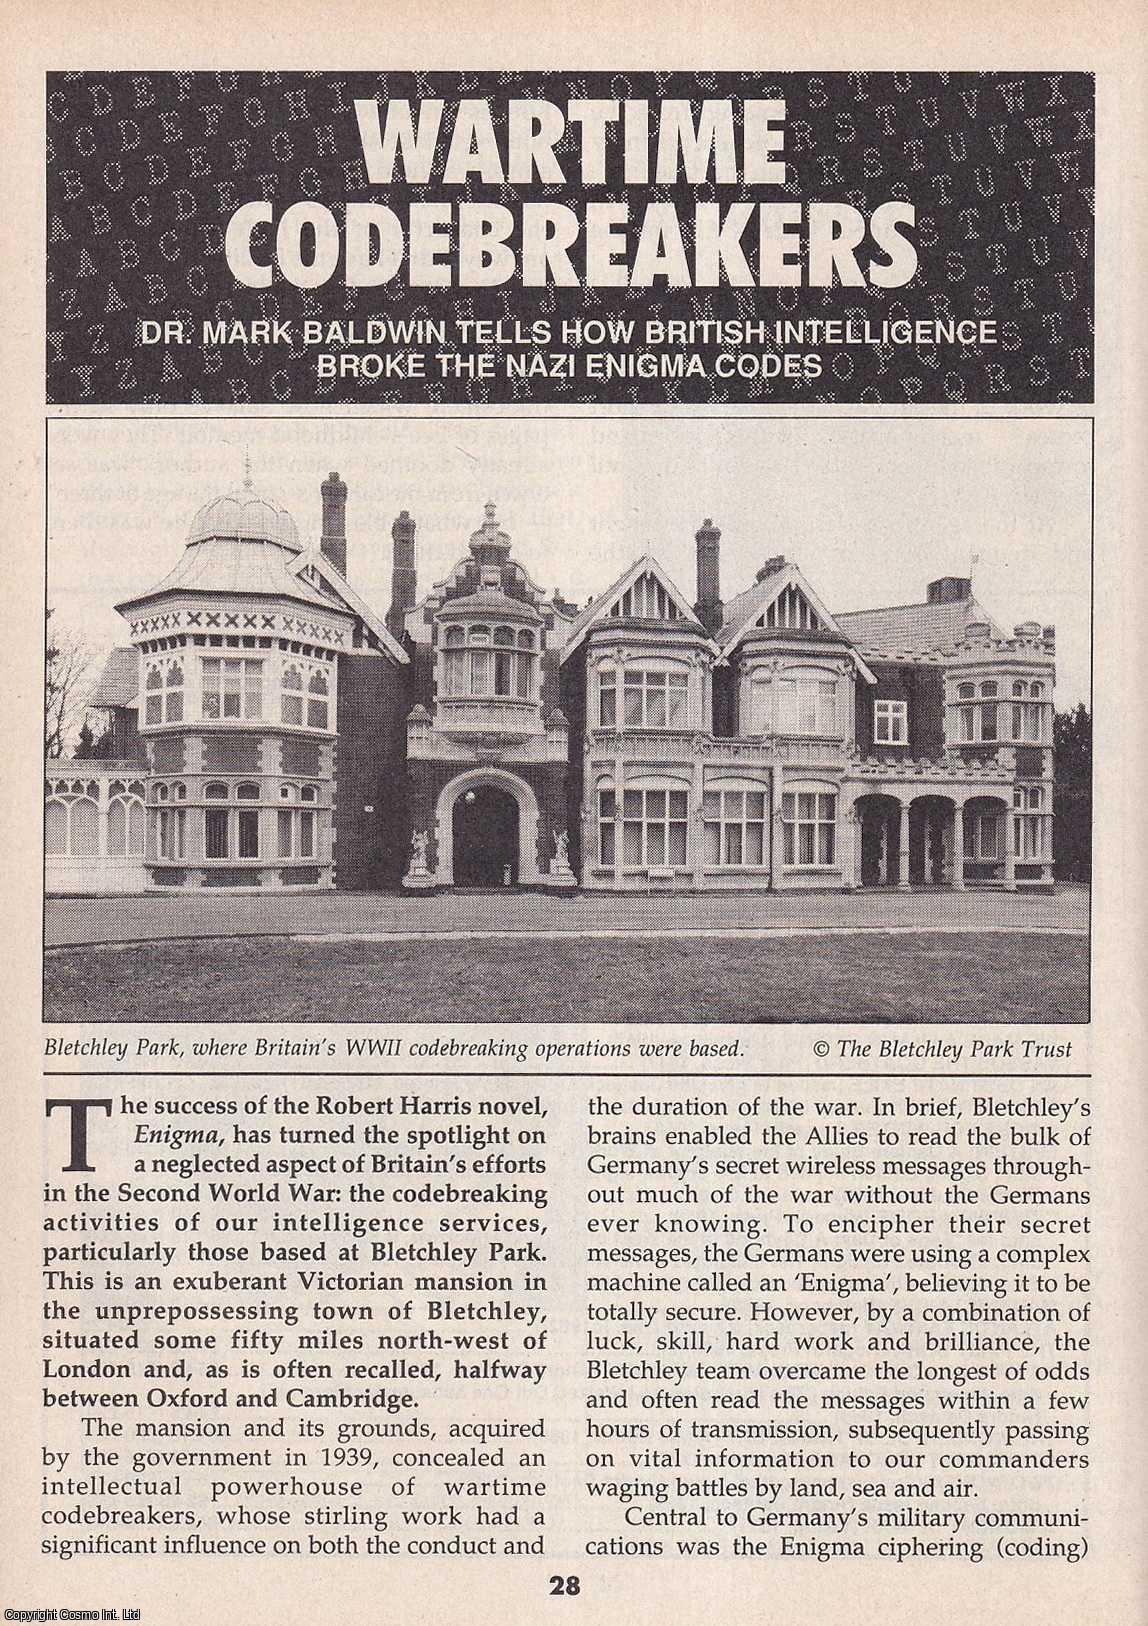 Mark Baldwin - Wartime Codebreakers. How British Intelligence Broke The Nazi Enigma Codes. This is an original article separated from an issue of The Book & Magazine Collector publication.